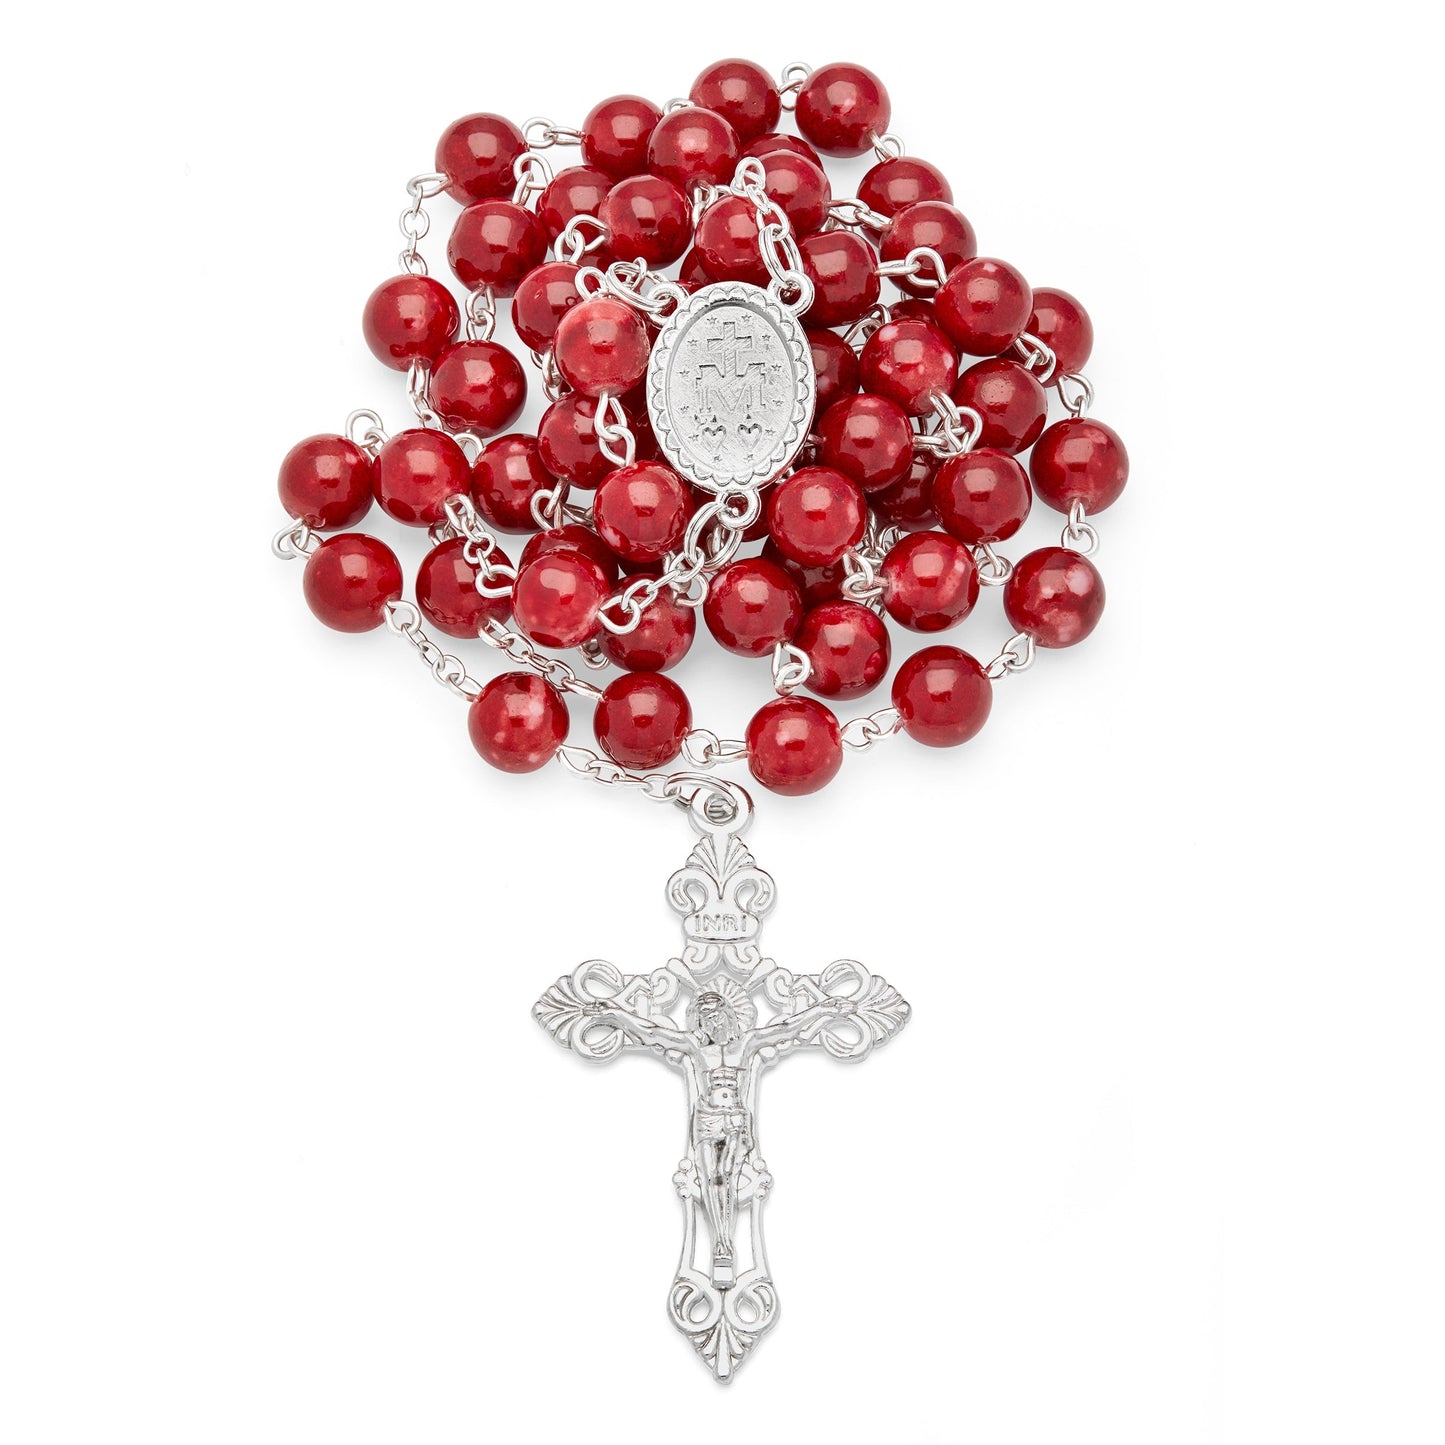 MONDO CATTOLICO Prayer Beads 55 cm (21.65 in) / 8 mm (0.3 in) Case and Rosary in Red Marble Glass